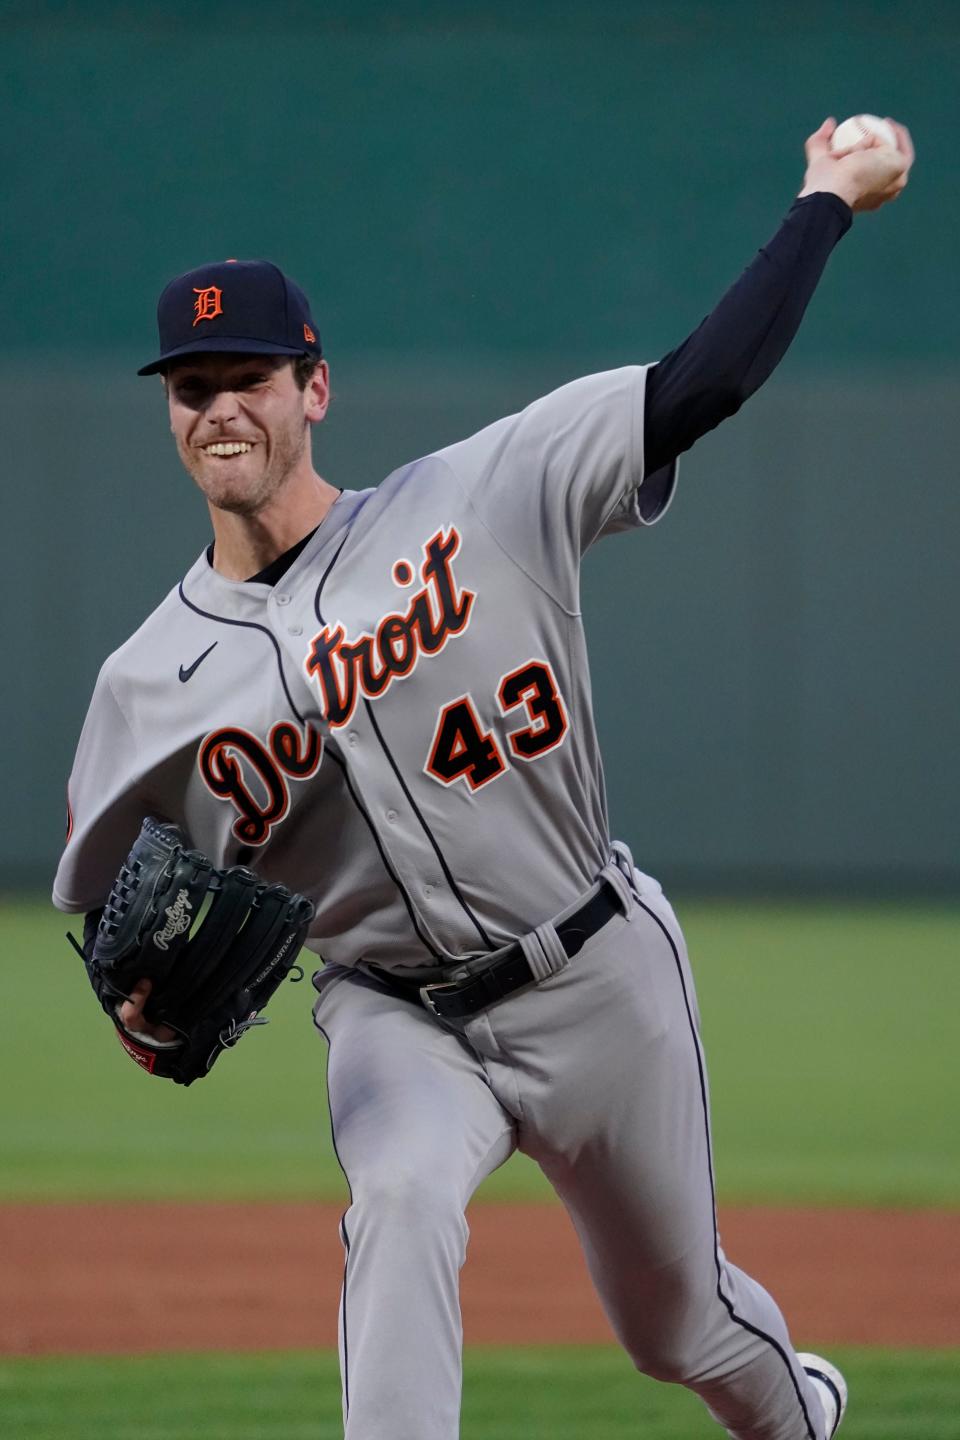 Tigers pitcher Joey Wentz warms up in the first inning against prior to throwing against the Royals on Friday, Sept. 9, 2022, in Kansas City, Missouri.